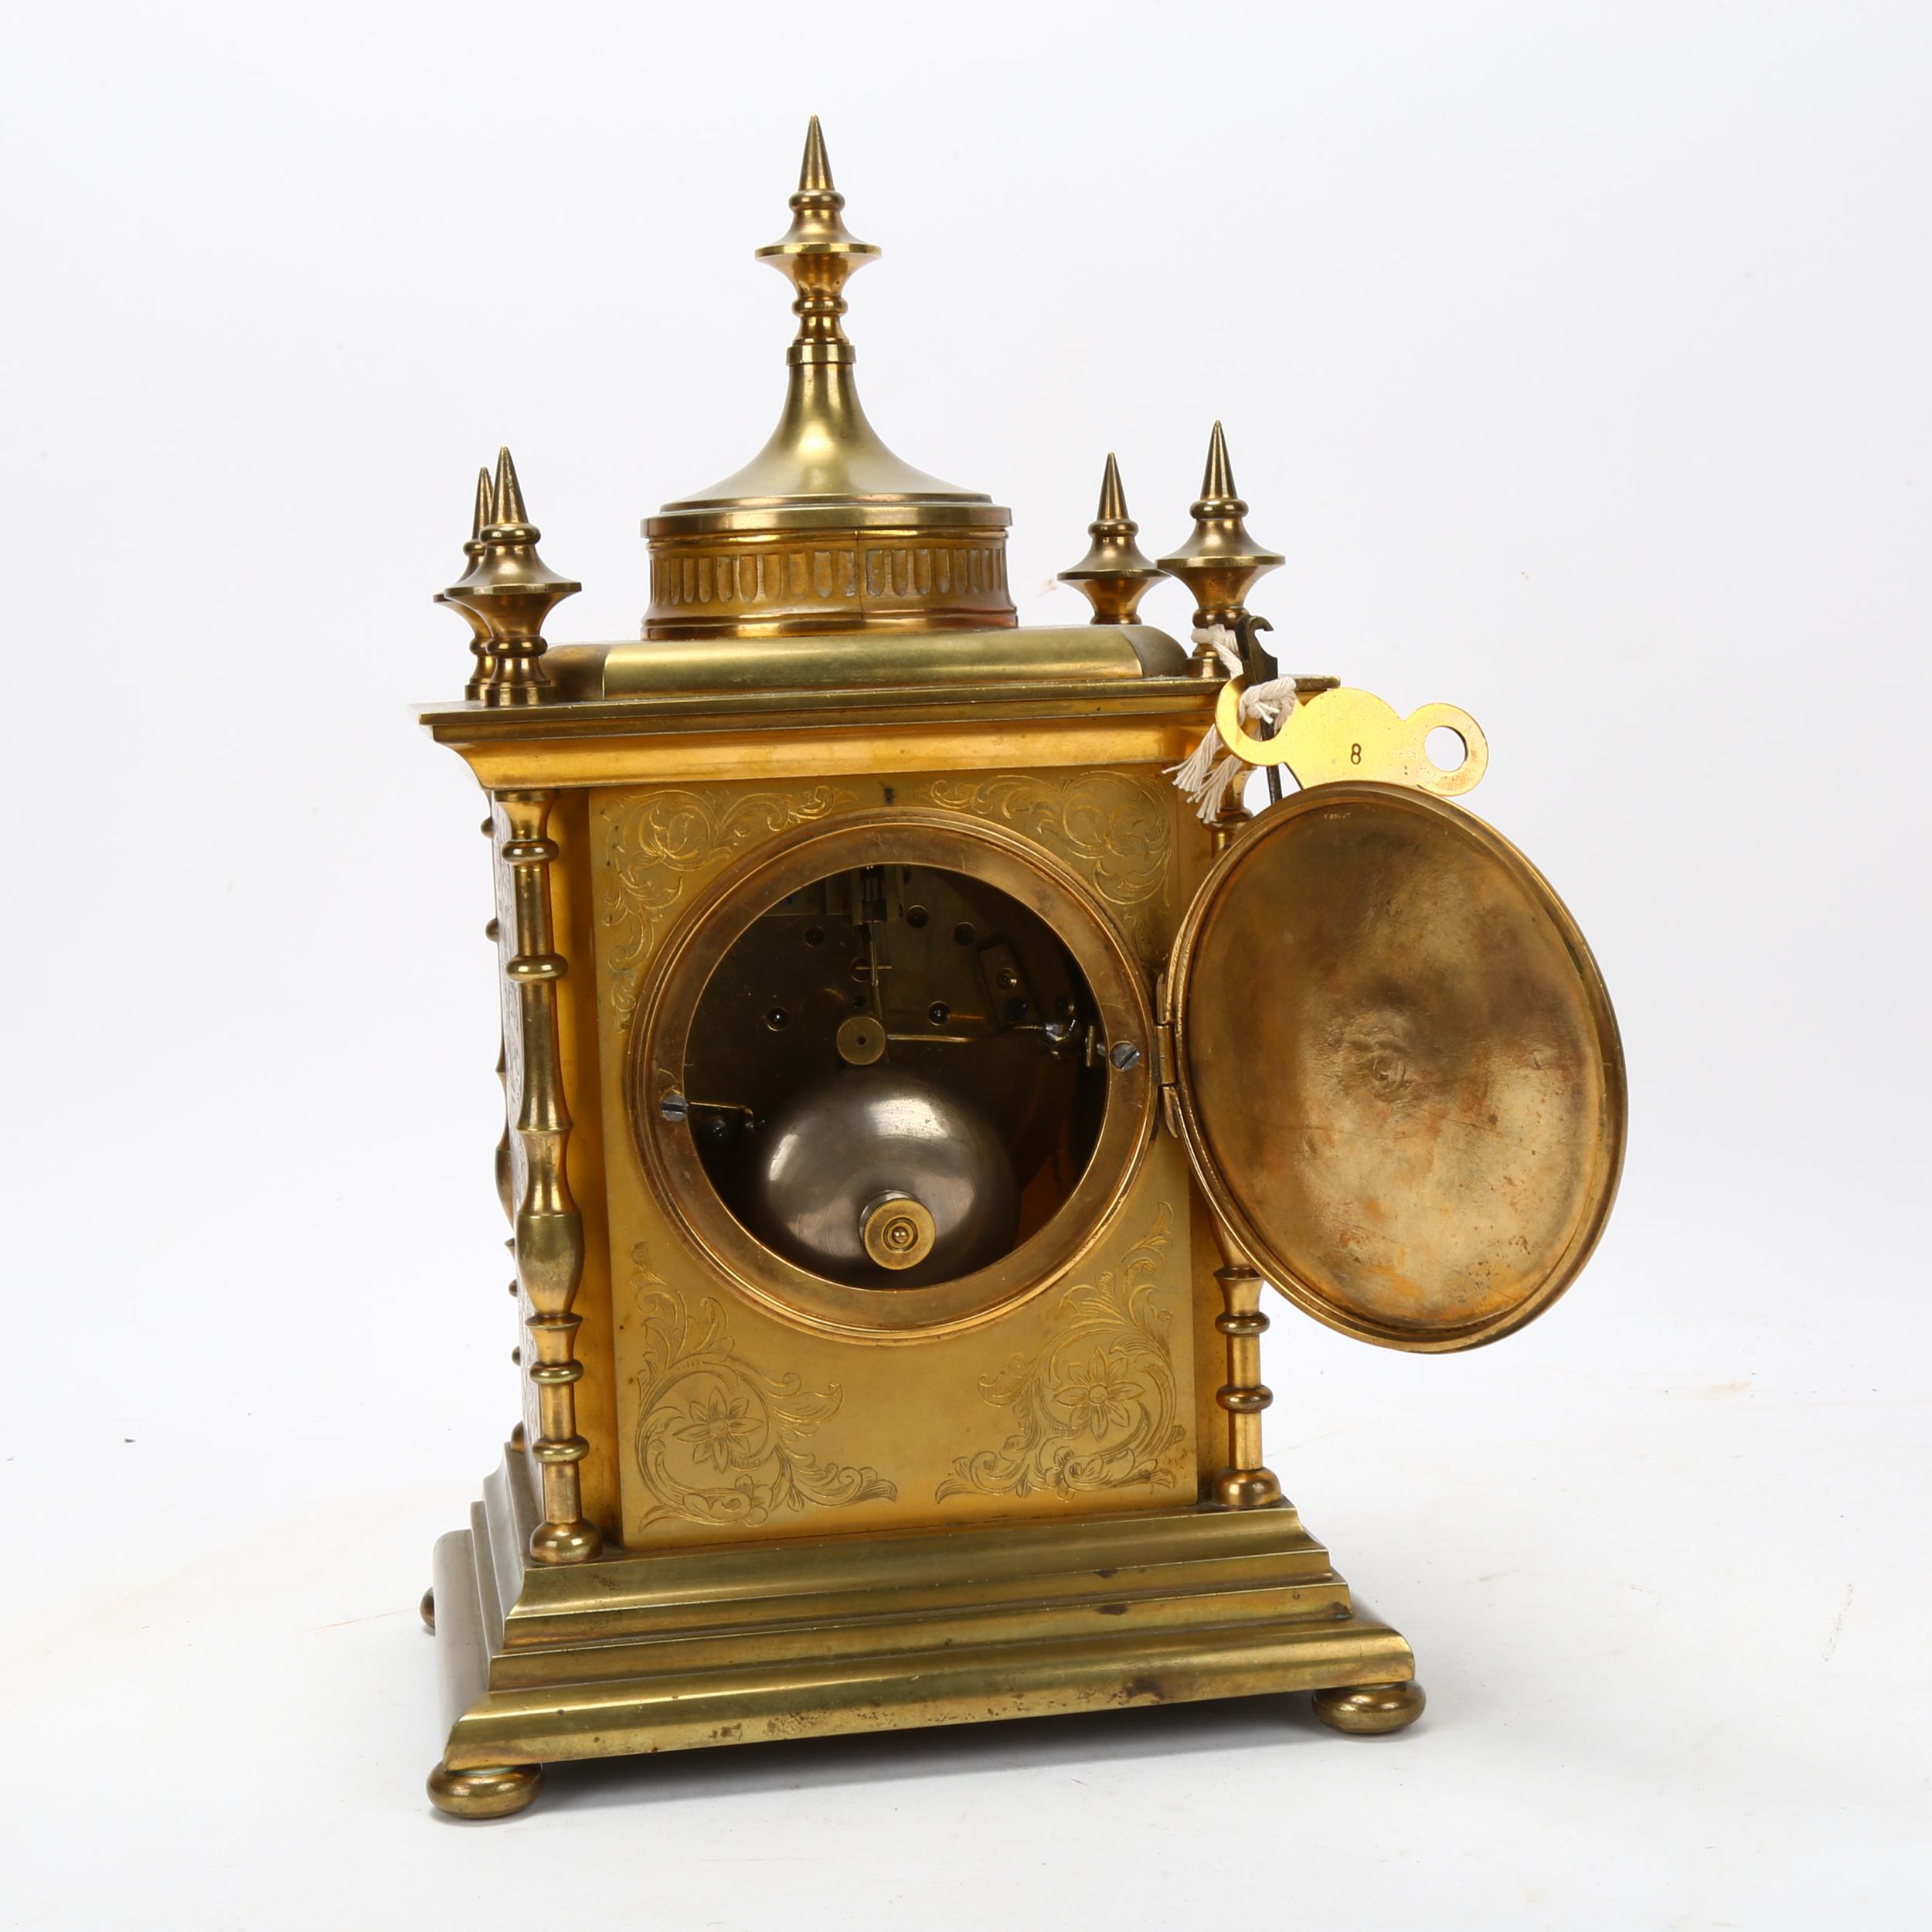 19th century French gilt-brass cased 8-day mantel clock, by Graham & Morton Paris, with silvered - Image 3 of 3